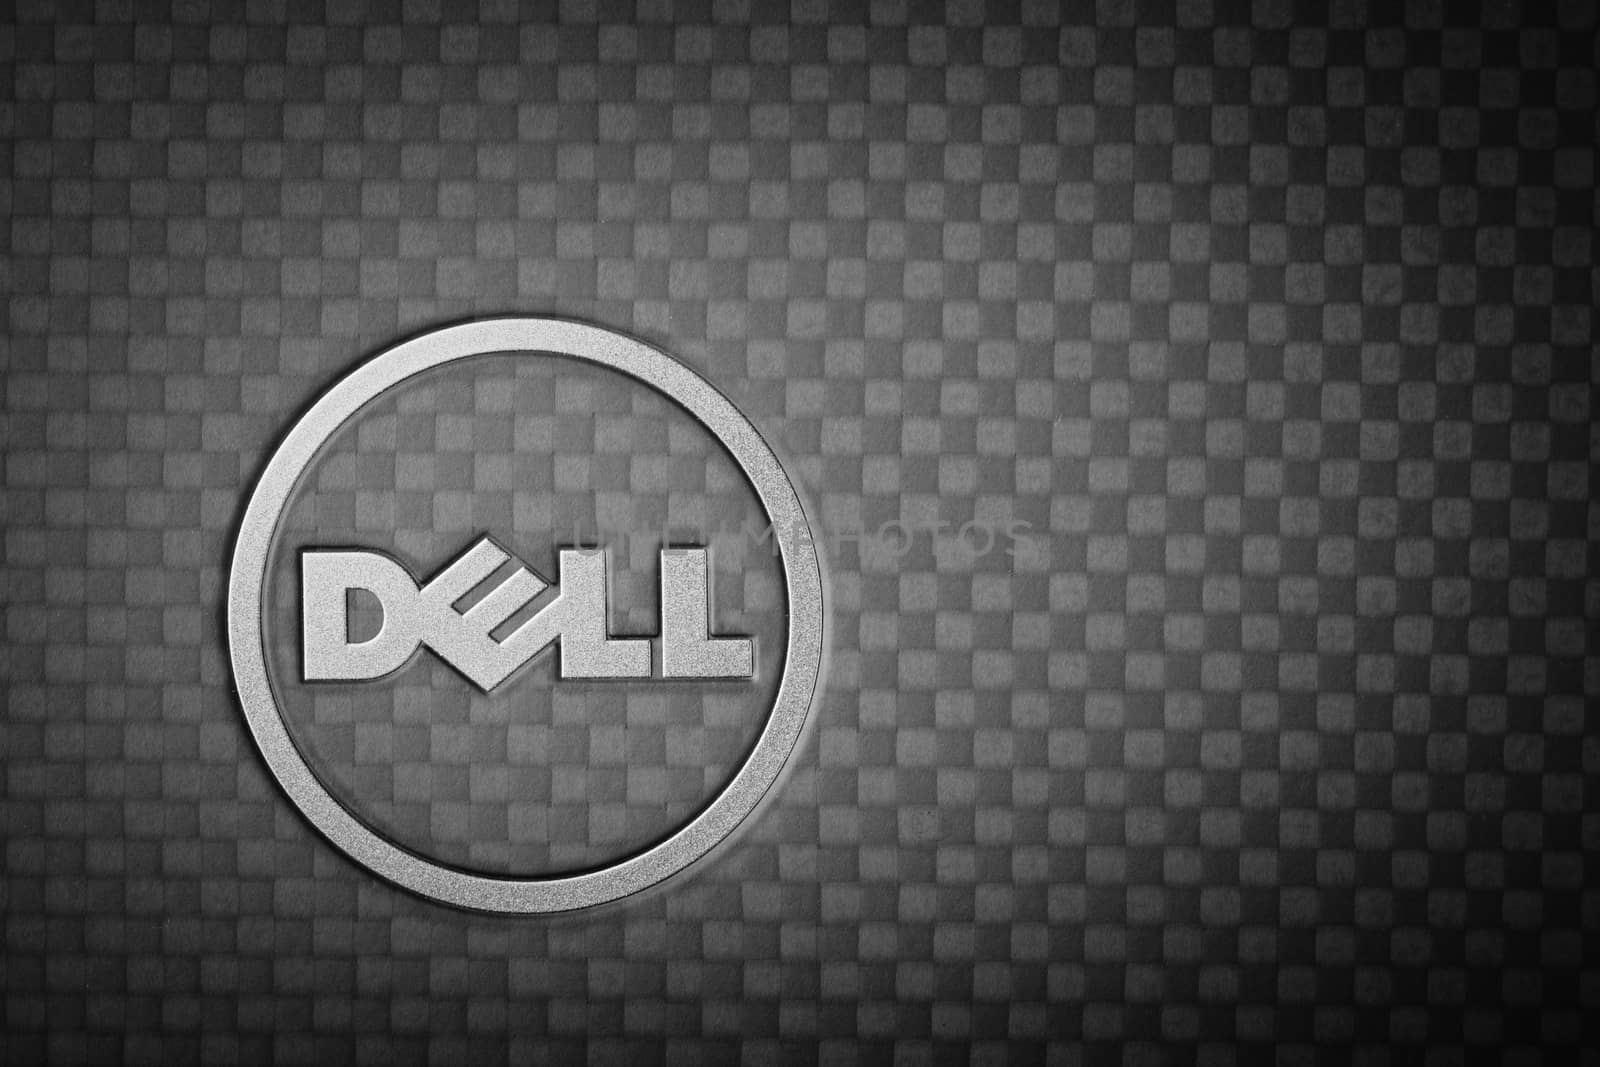 BANGKOK THAILAND - JANUARY25 : Dell logo made from stainless steel on notebook cover black color, in Bangkok, Thailand on January 25, 2015